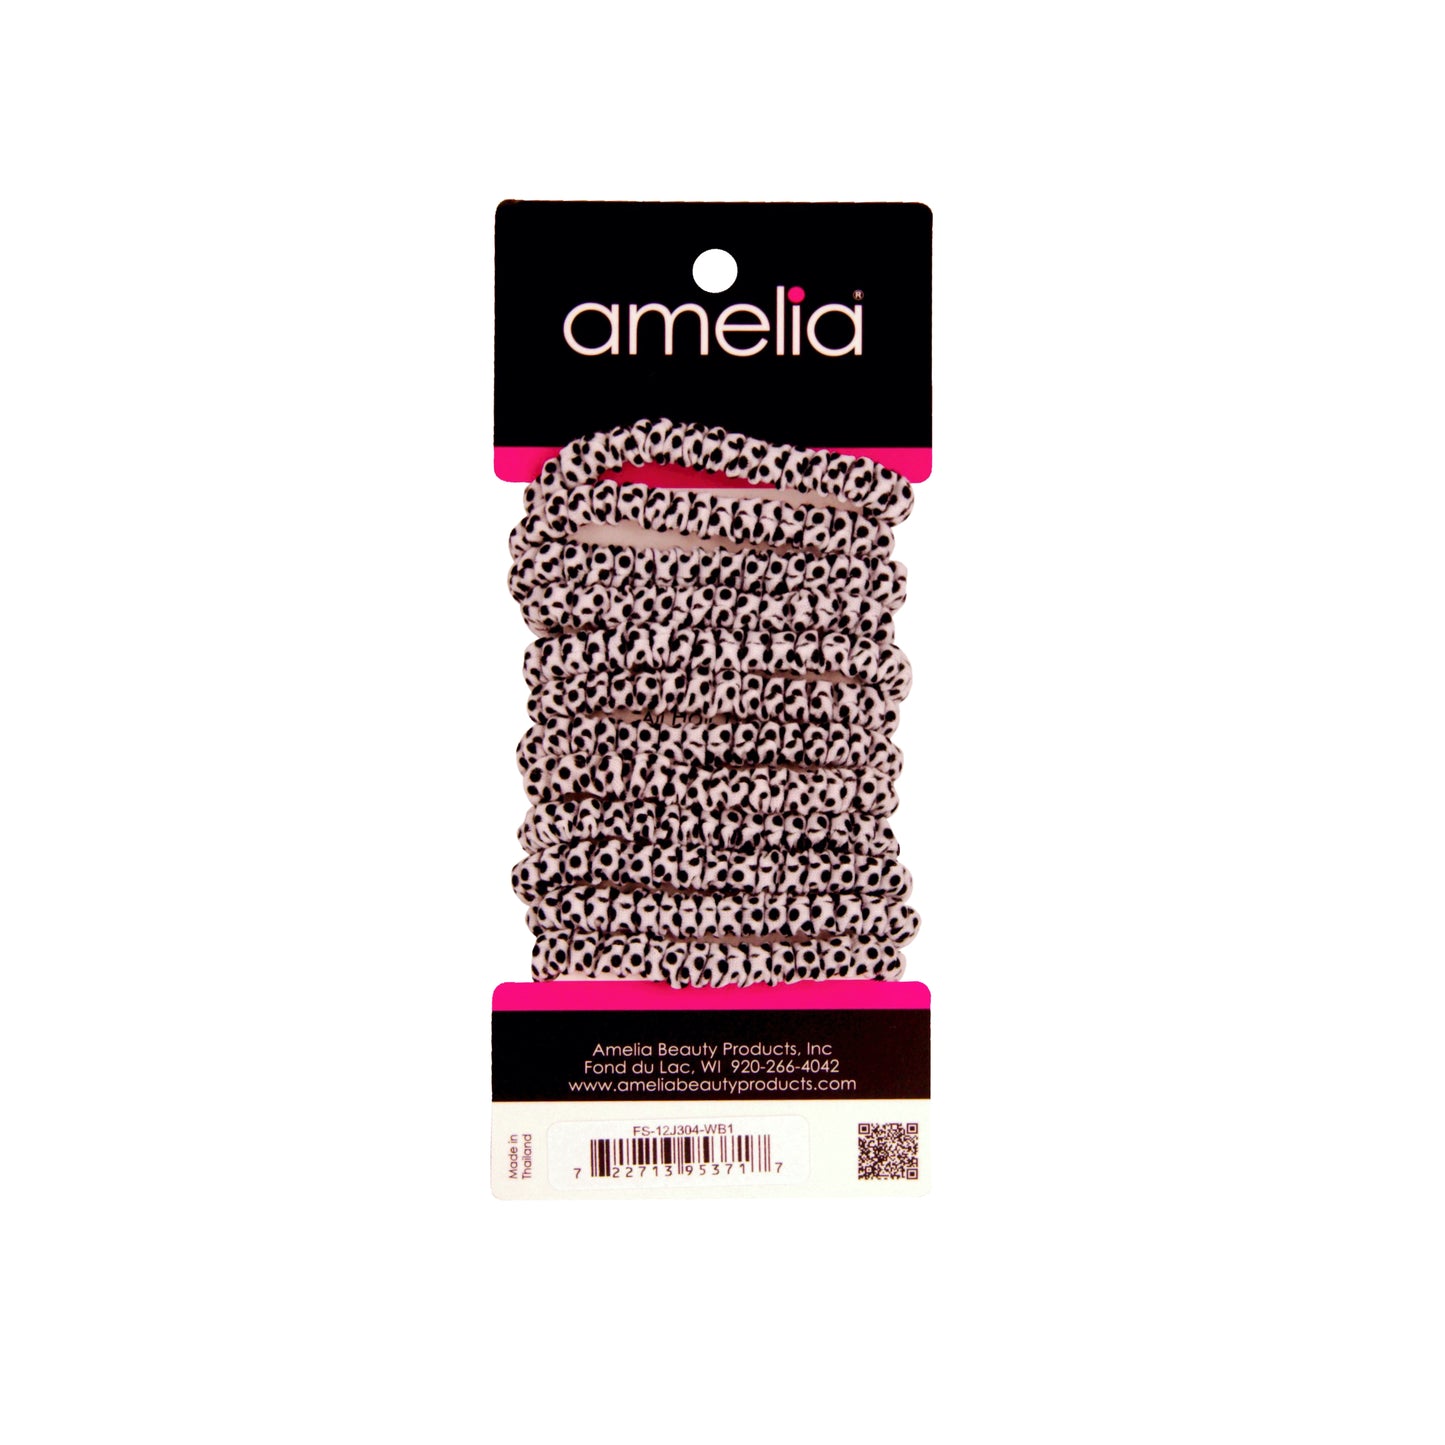 Amelia Beauty, White with Black Dots Skinny Jersey Scrunchies, 2.125in Diameter, Gentle on Hair, Strong Hold, No Snag, No Dents or Creases. 12 Pack